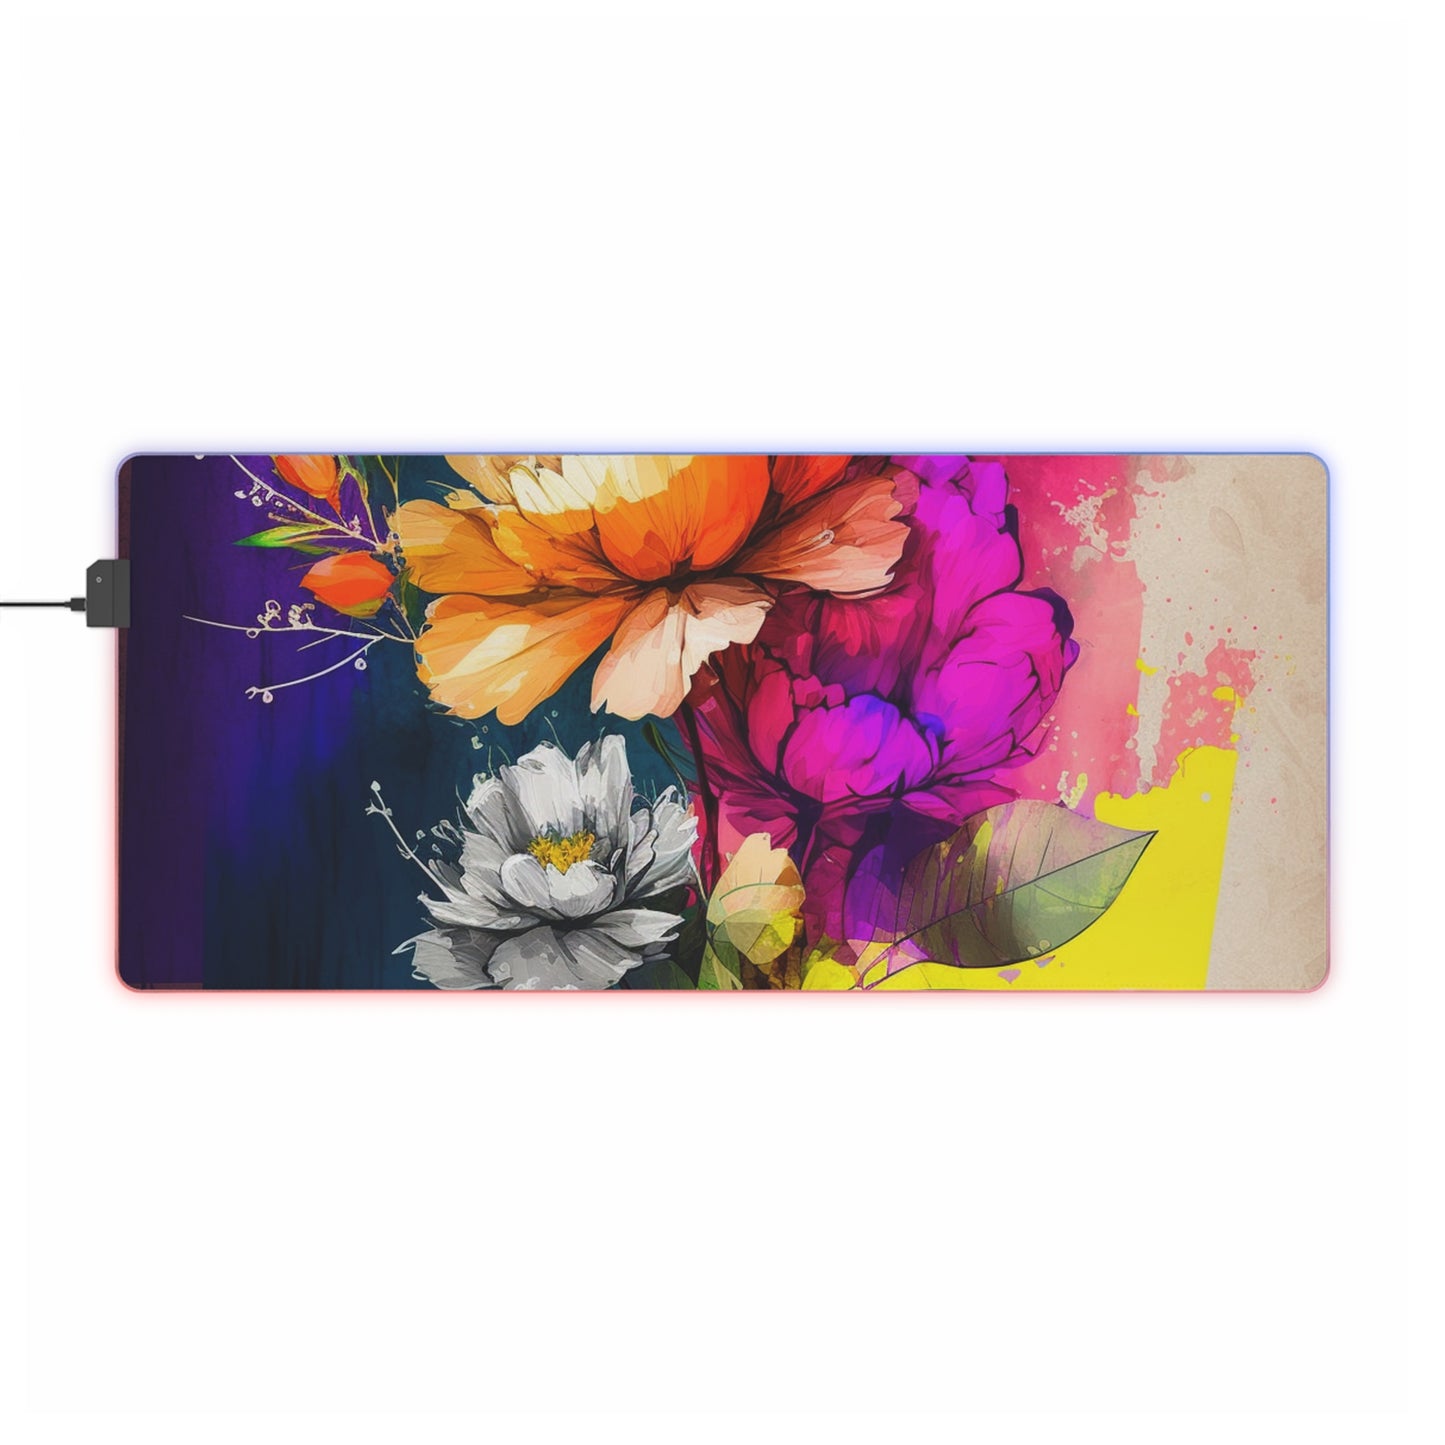 LED Gaming Mouse Pad Bright Spring Flowers 4